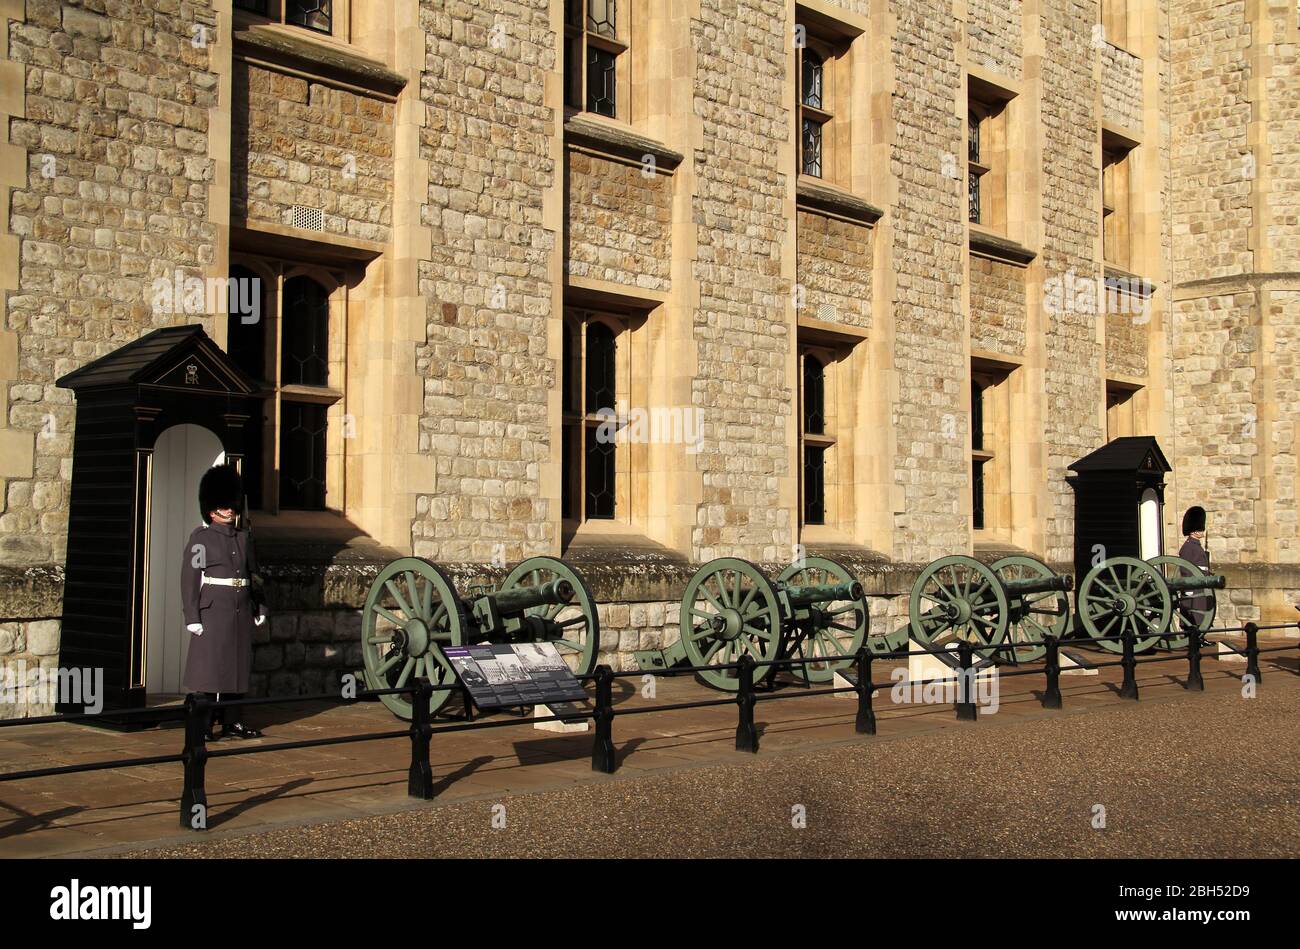 Members of the Tower Guard protect the Jewel House, which houses the British Crown Jewels in the Tower of London complex March 13, 2020 in London, UK Stock Photo